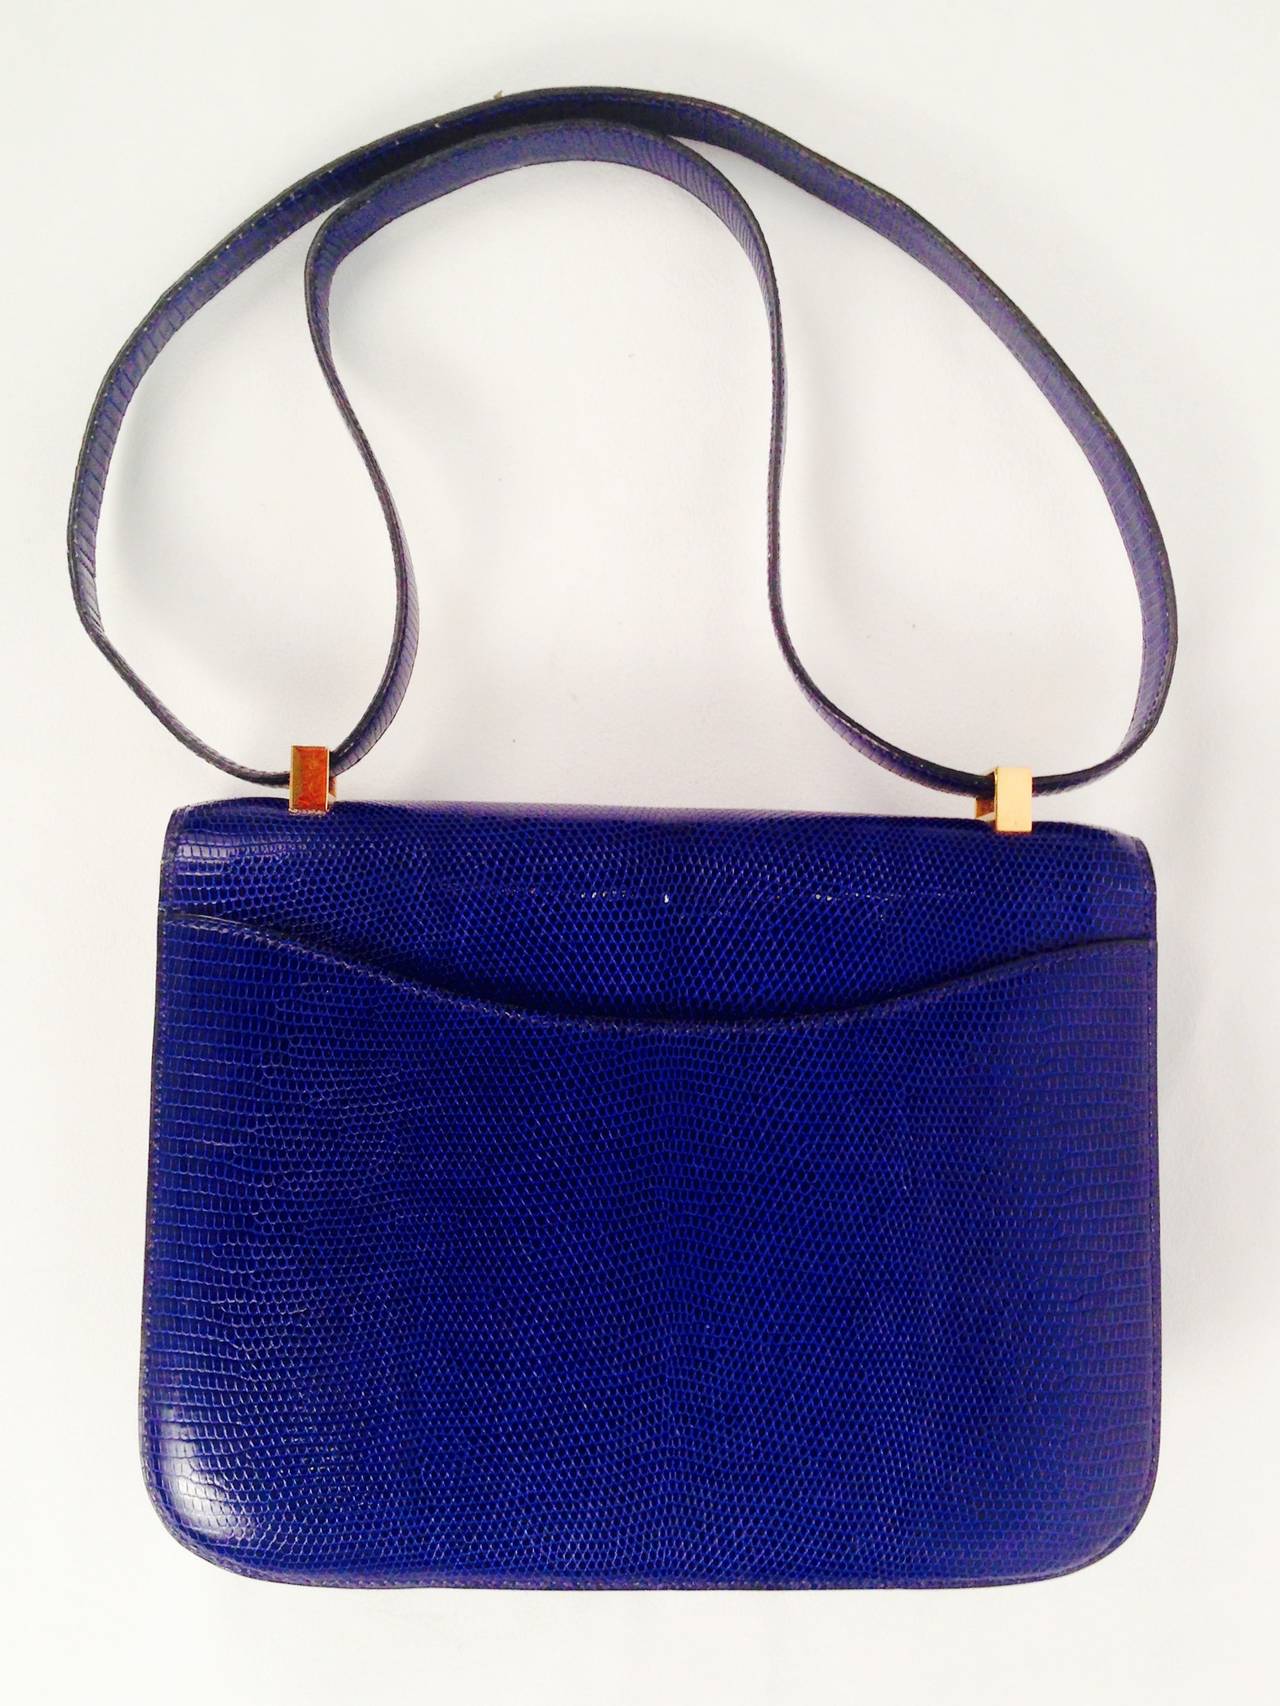 Jackie O carried this bag...constantly!  